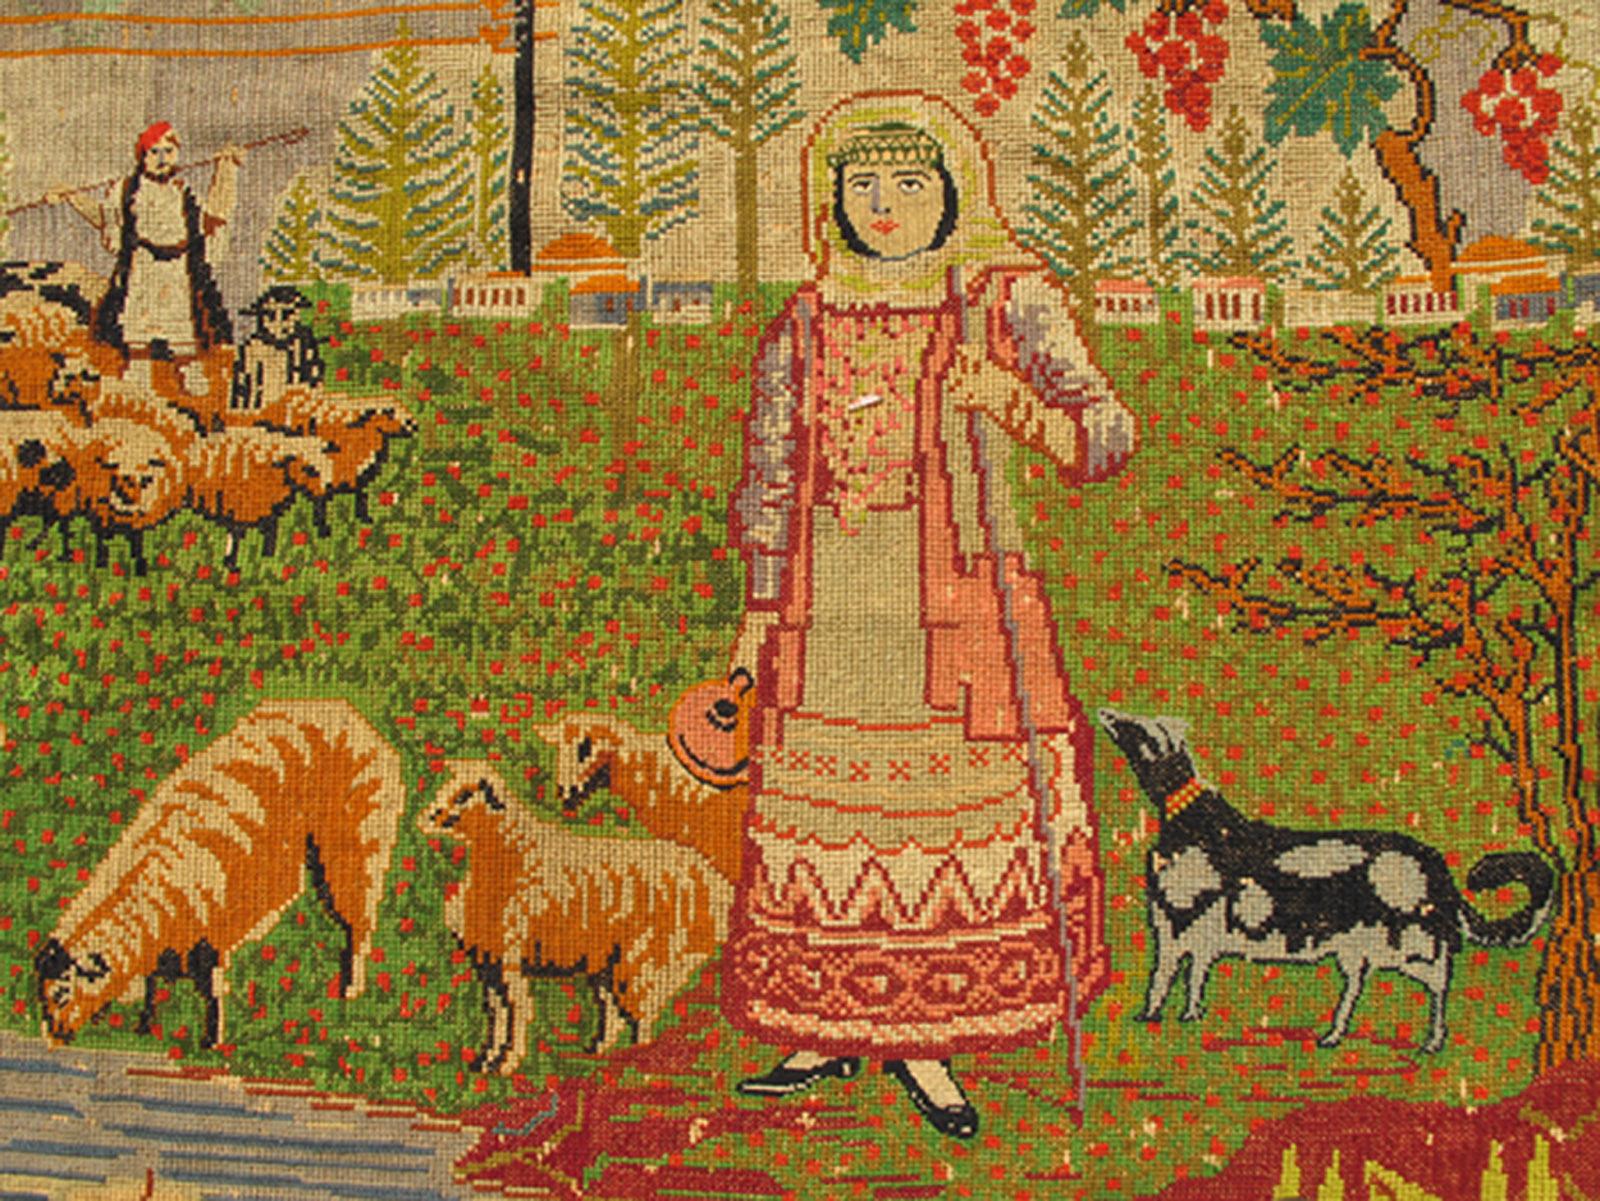 French Antique European Folk Art Tapestry with Country Side Scene in Bright Colors